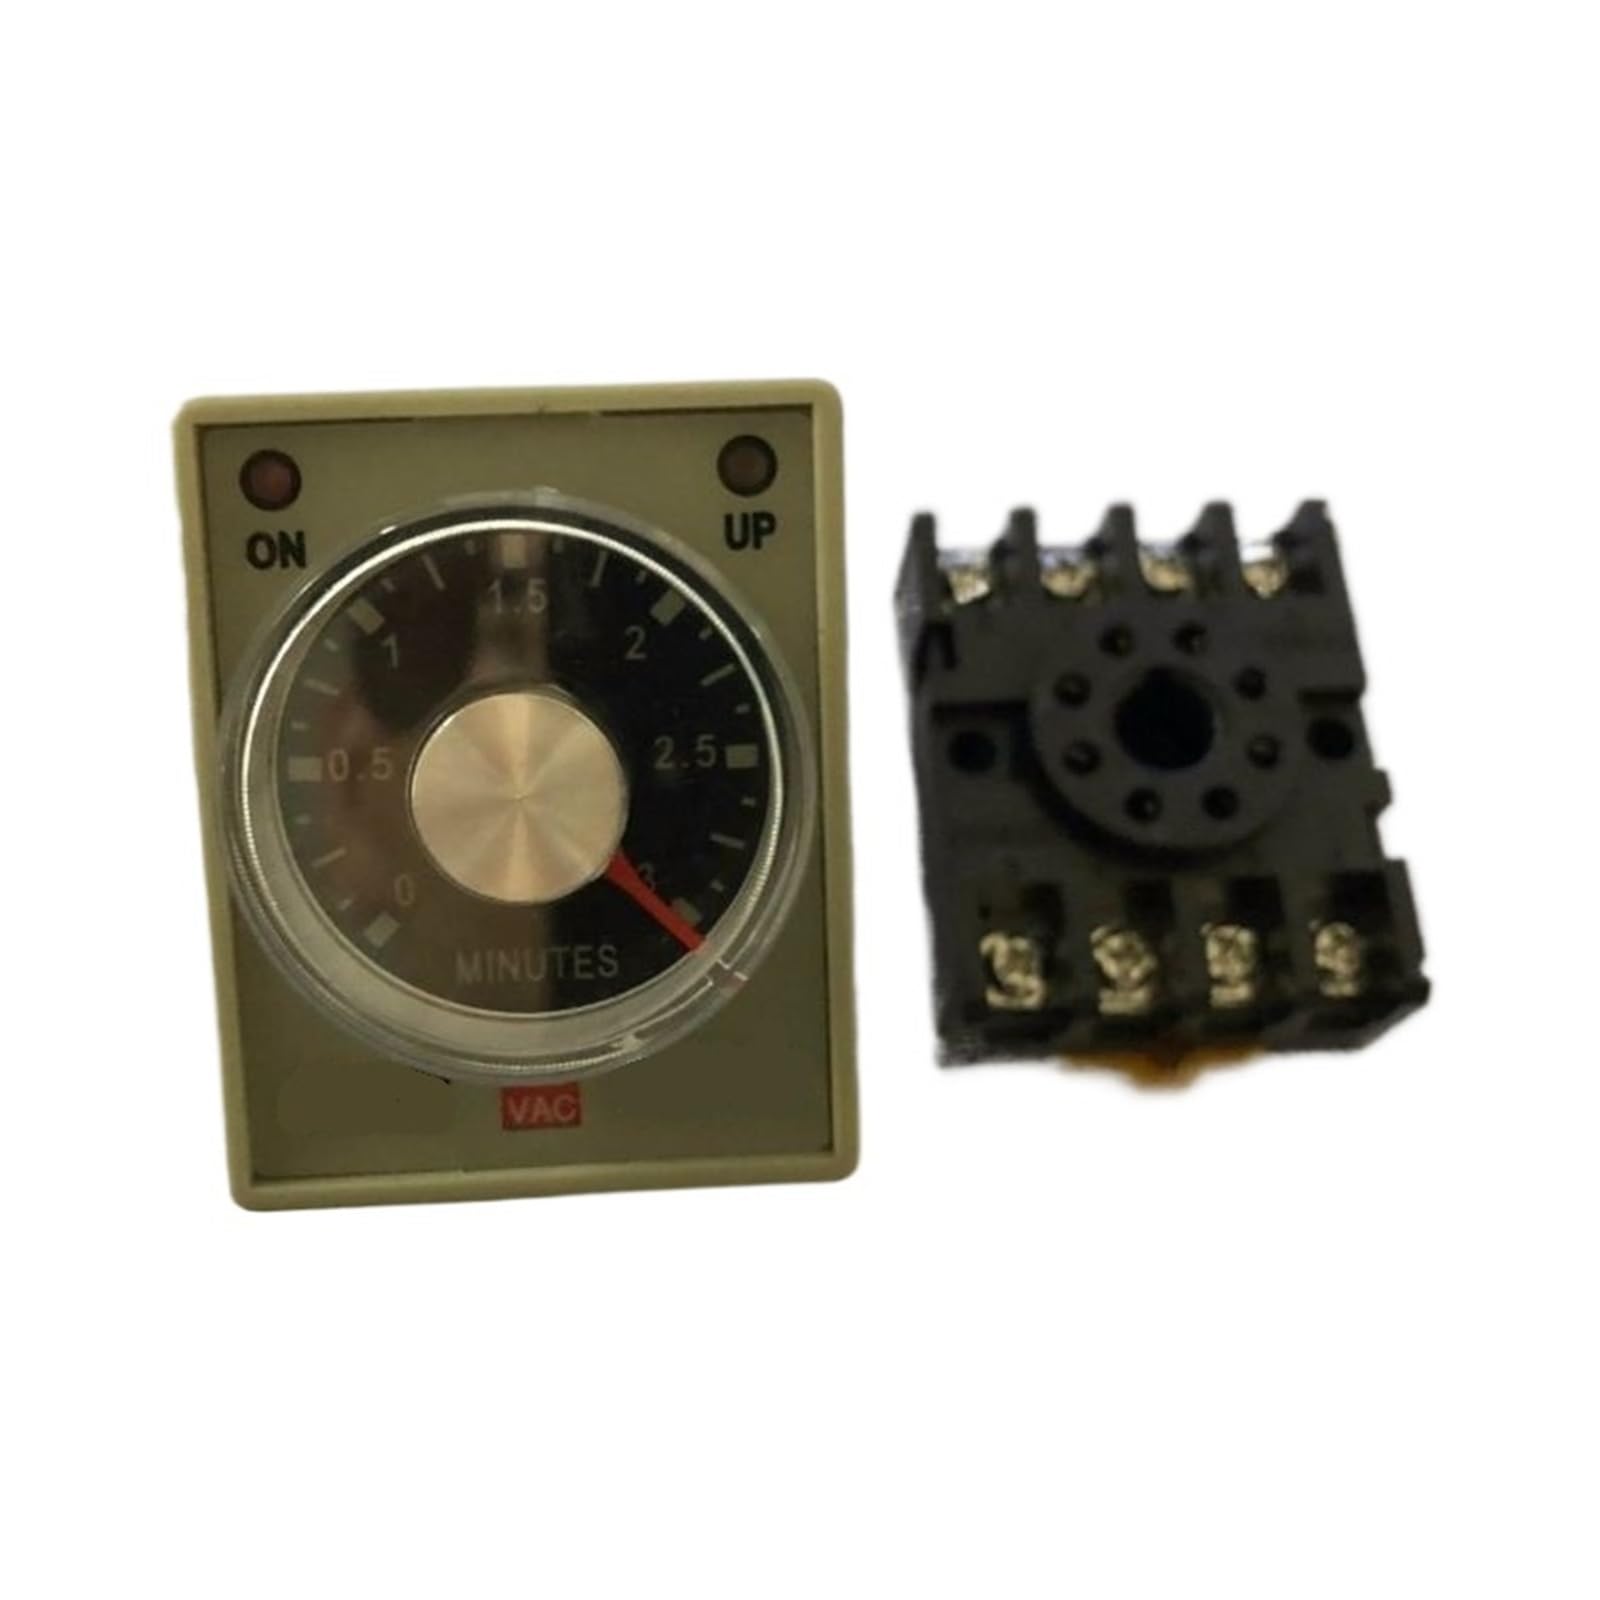 AH3-3 Time relay DC12V DC24V AC110V AC220V Delay Timer Time Relay with base 8Pin 1S 3S 6S 10S 30S 60S 6M 10M OSBCMZGE(Minute-3,DC24V) von OSBCMZGE